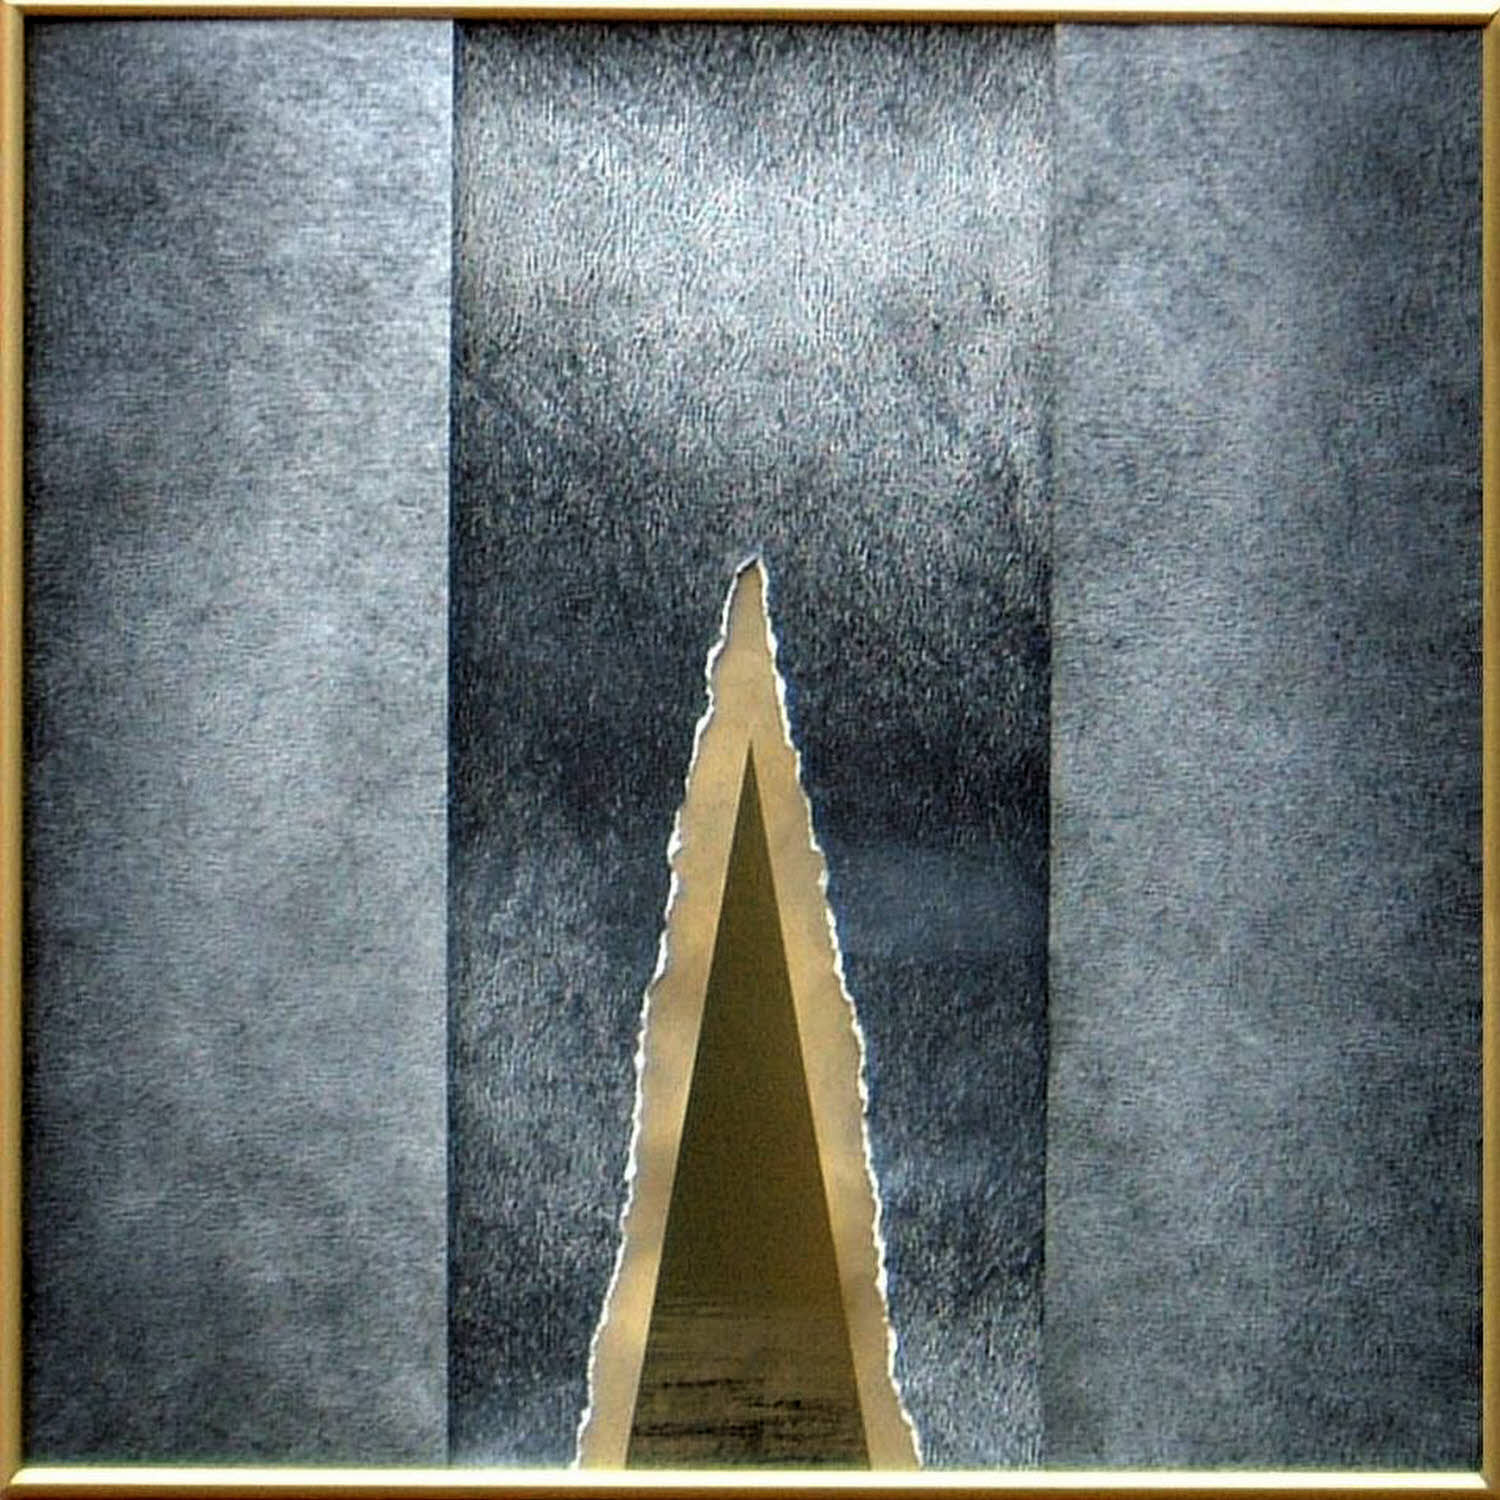 Gold IV, 2001, graphite on torn paper, collage, 20x20 inches